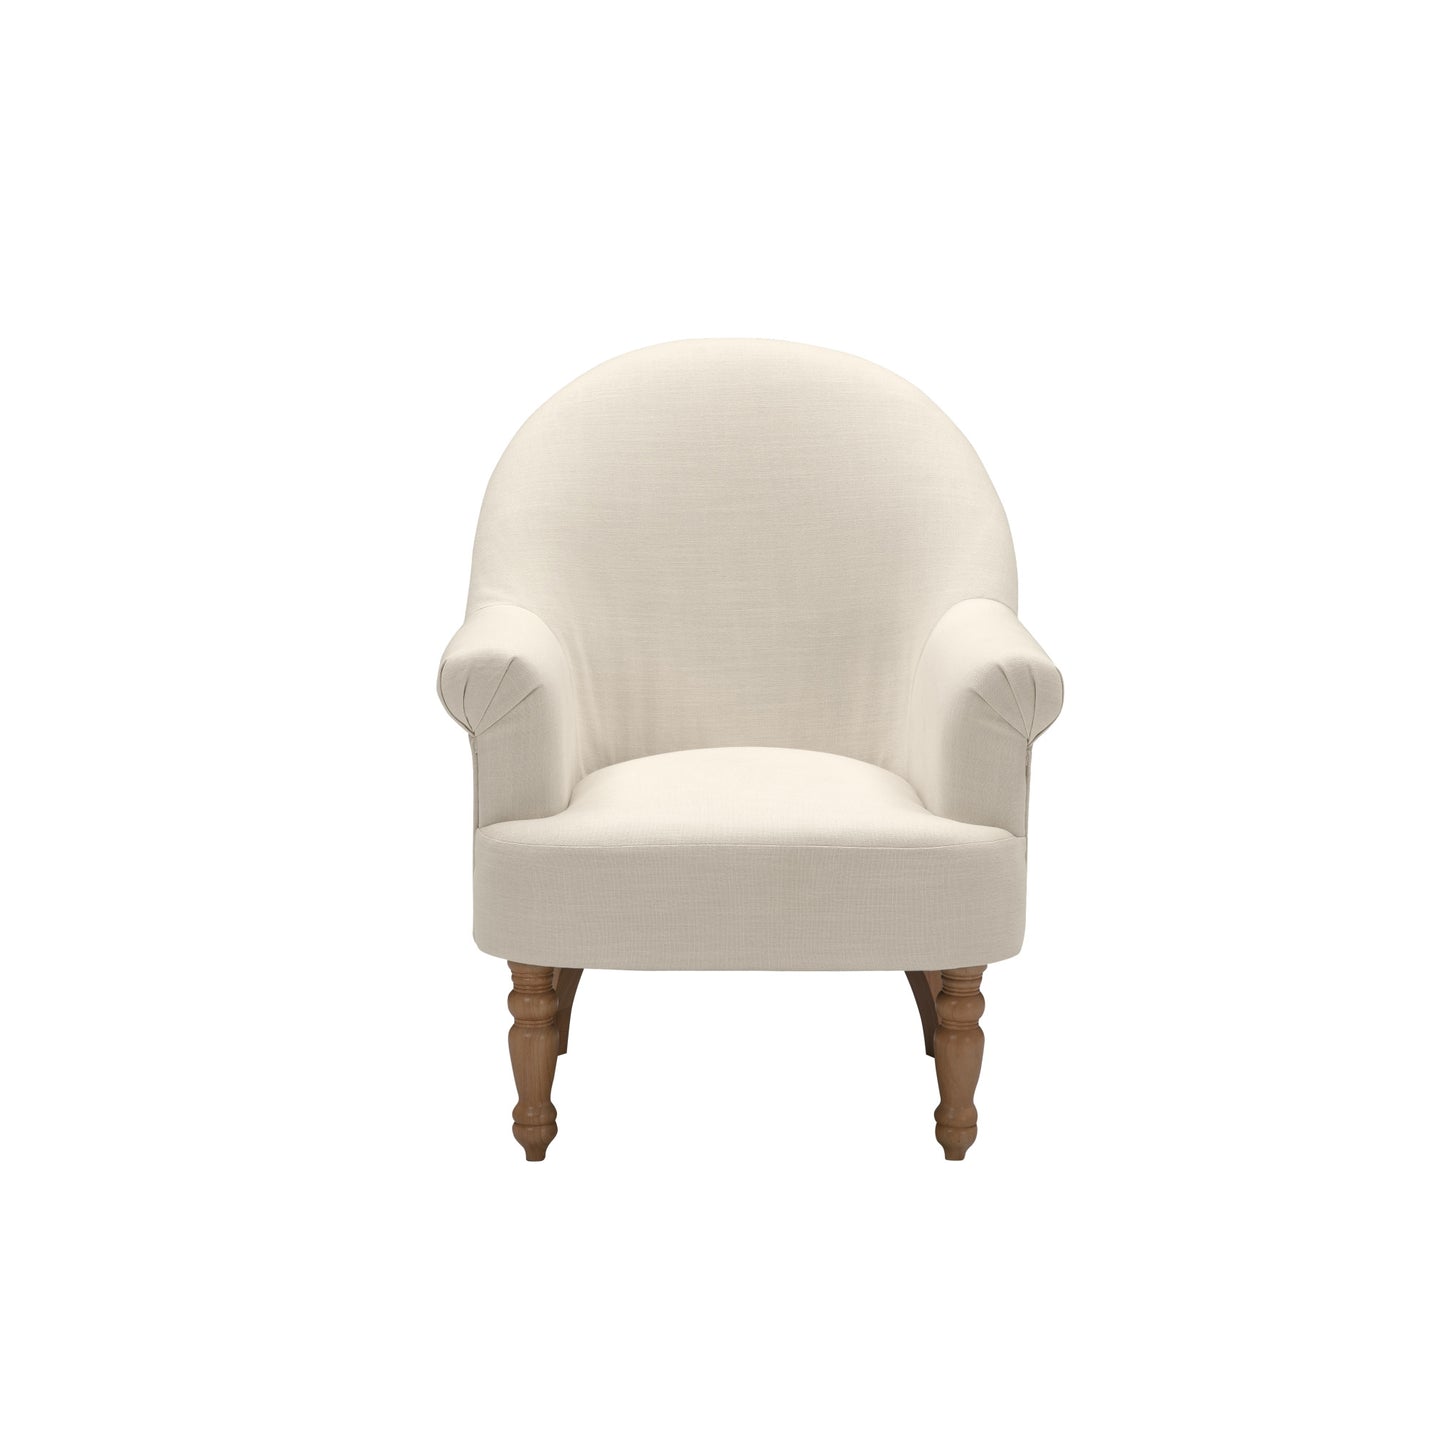 33" Cream And Brown Linen Arm Chair